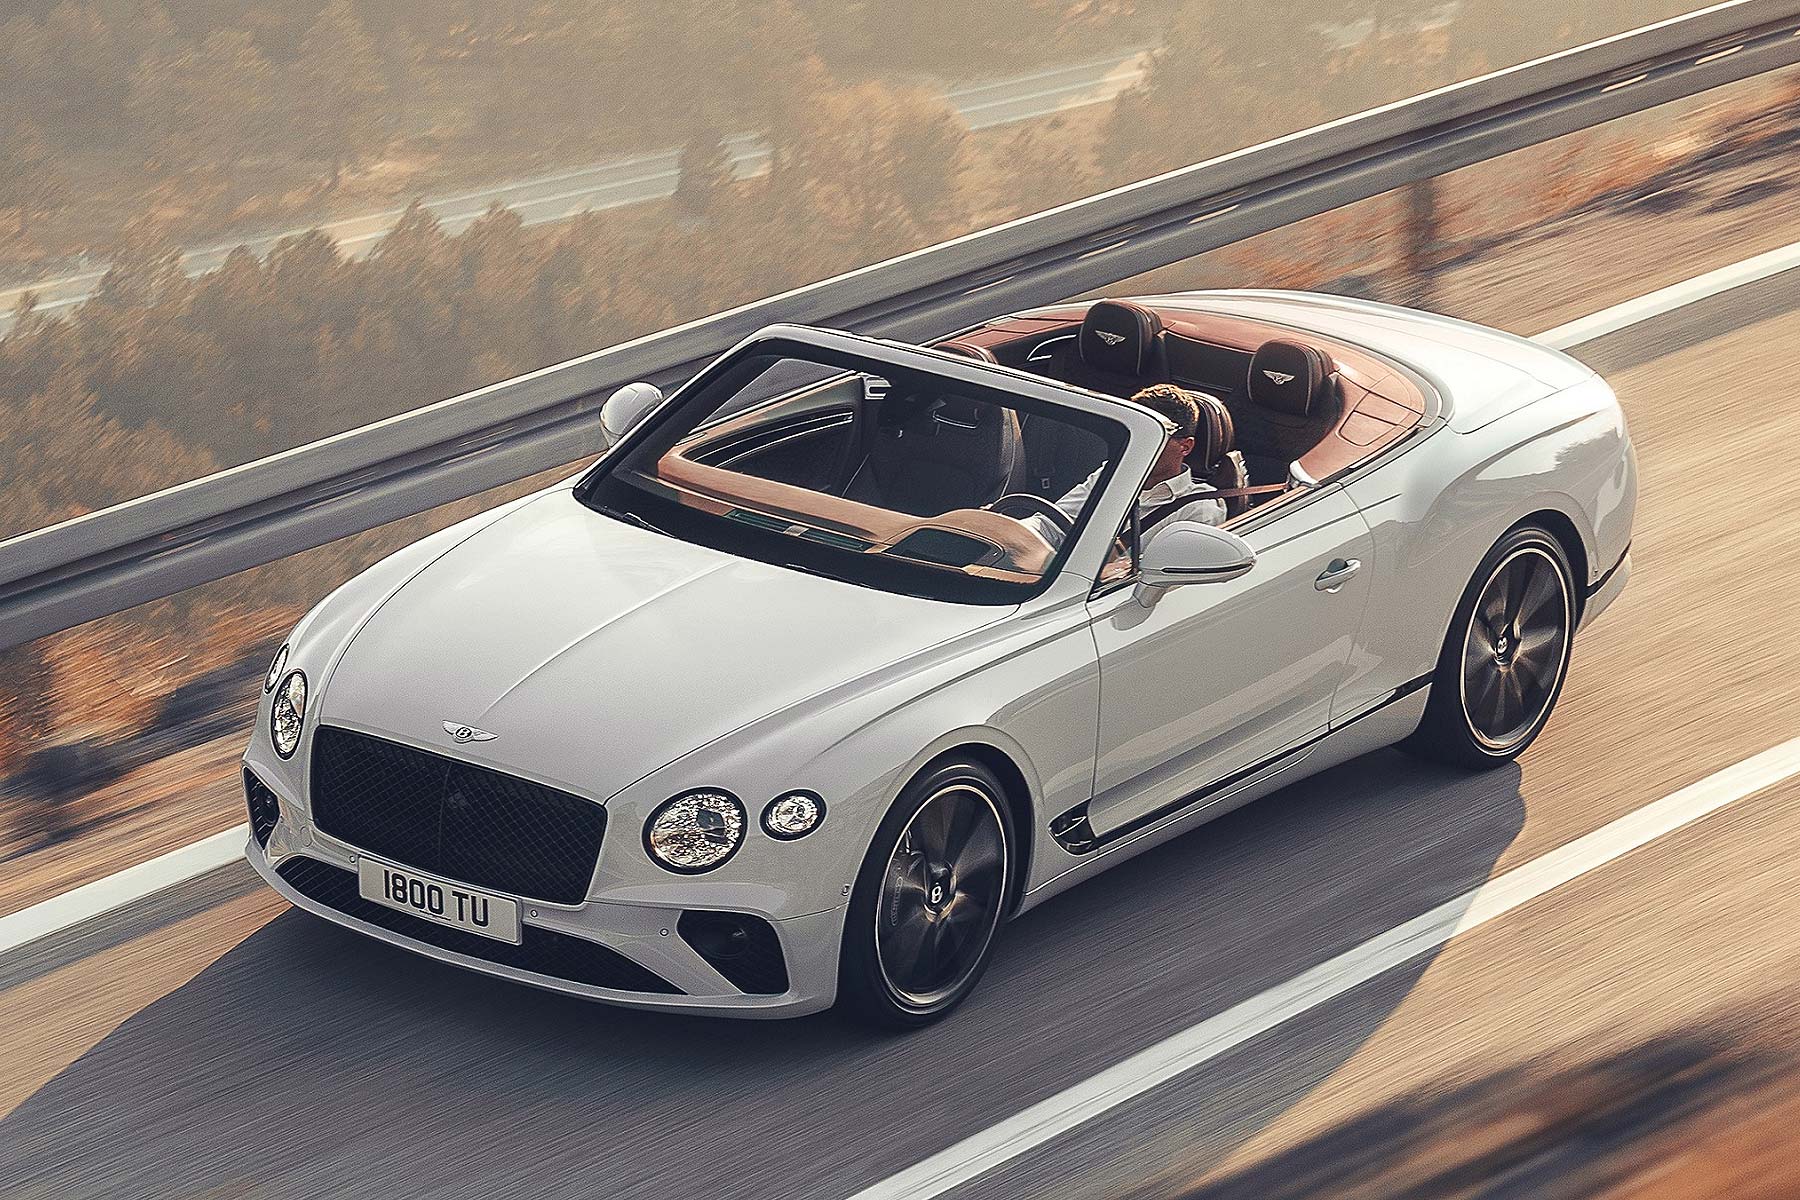 Elegance In Motion: The 2019 Bentley Continental GT Convertible